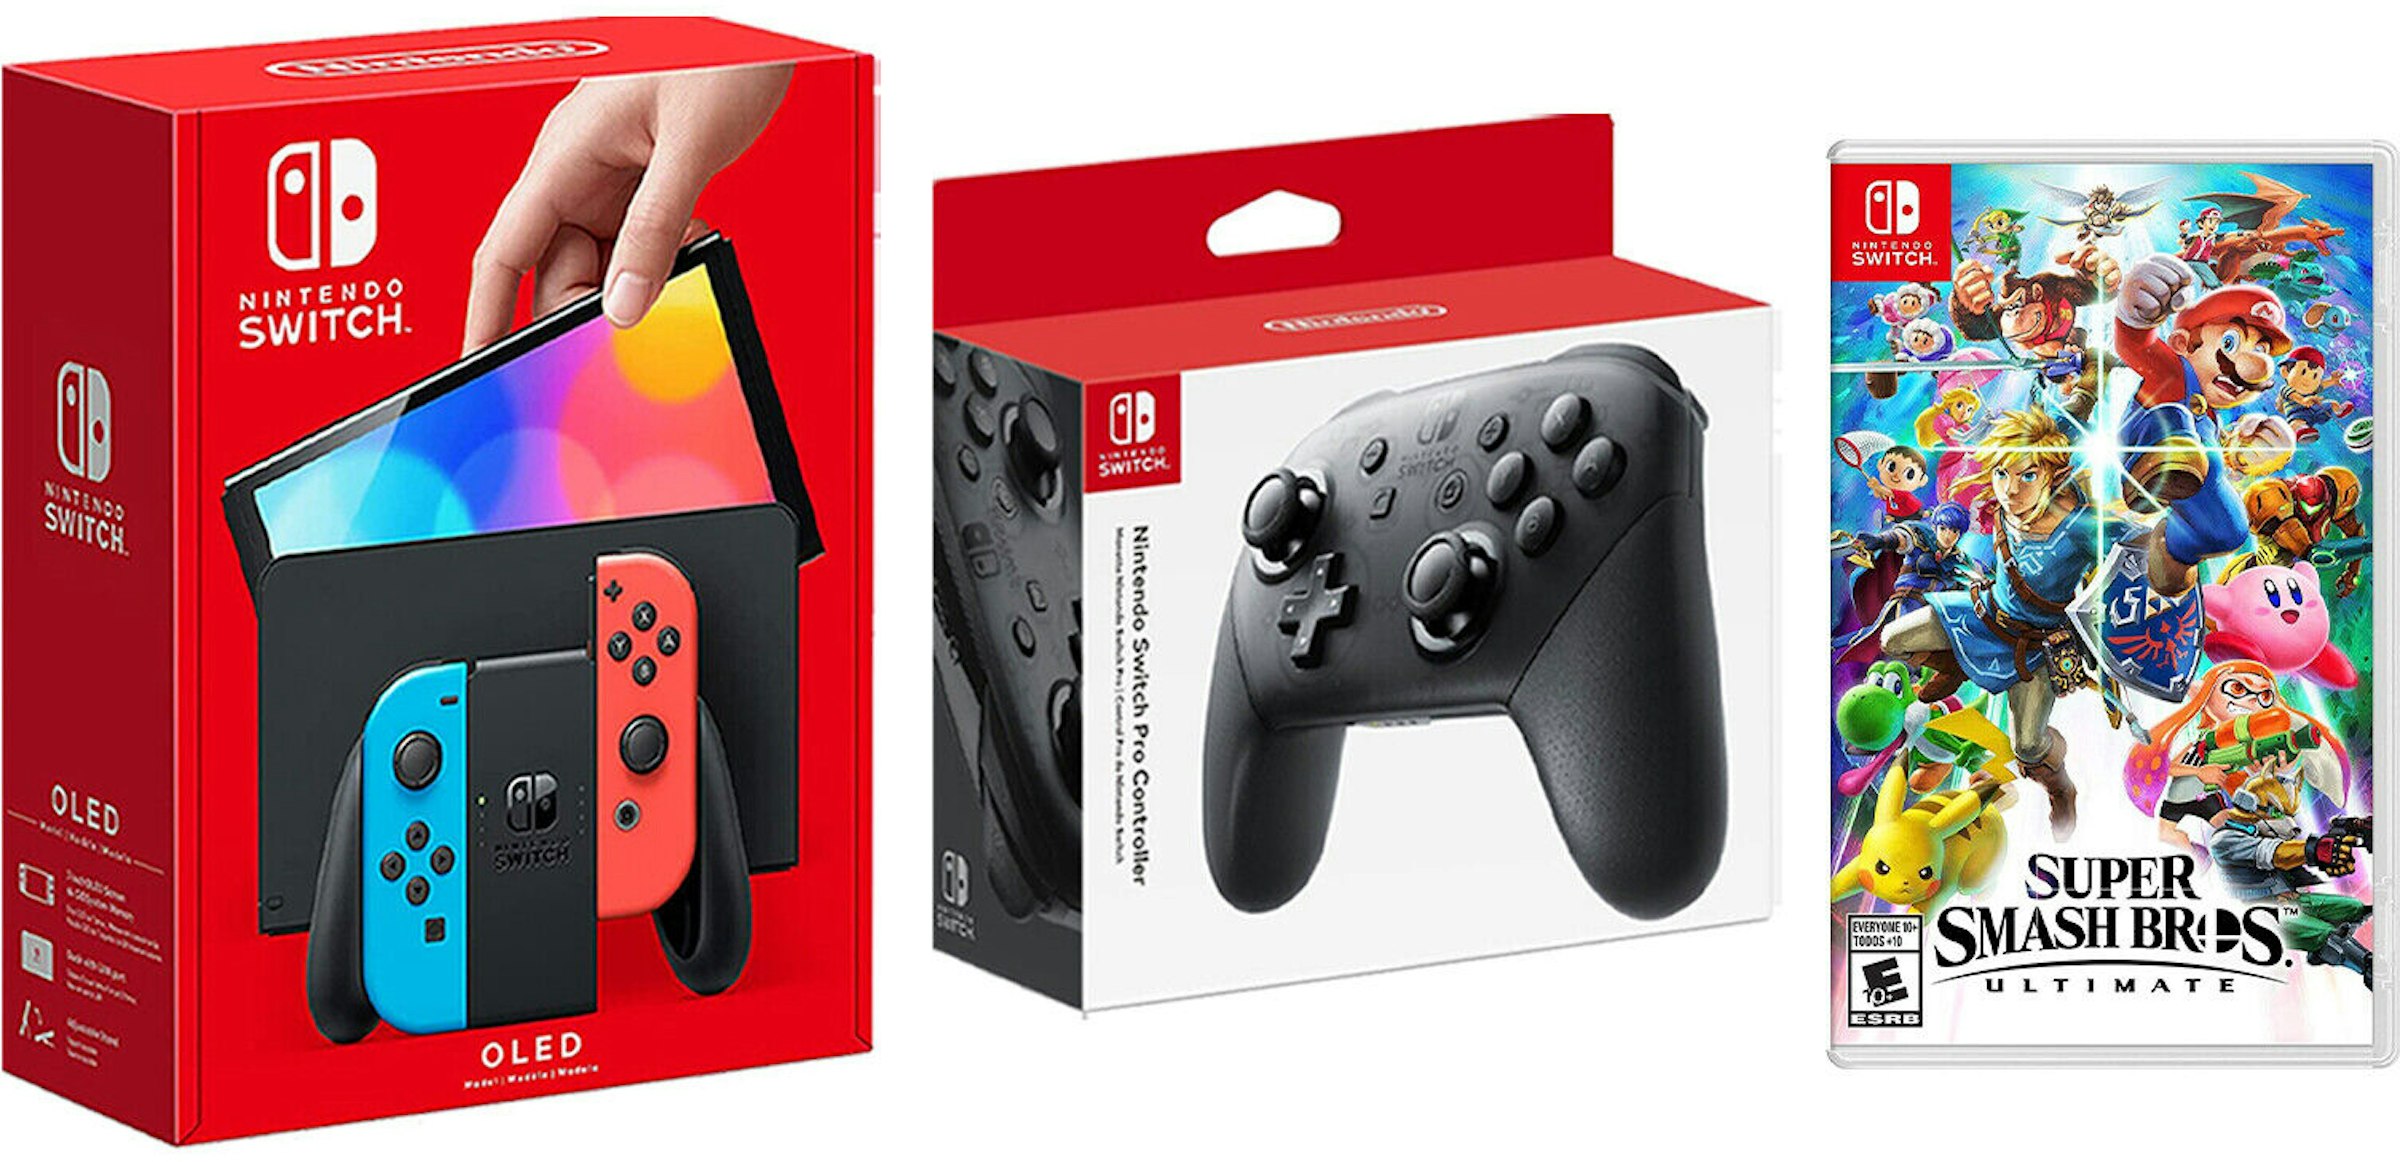 Nintendo Switch OLED with Pro Controller and Smash Bros Game Bundle NS-HEGSKABAA Neon Blue/Neon Red US